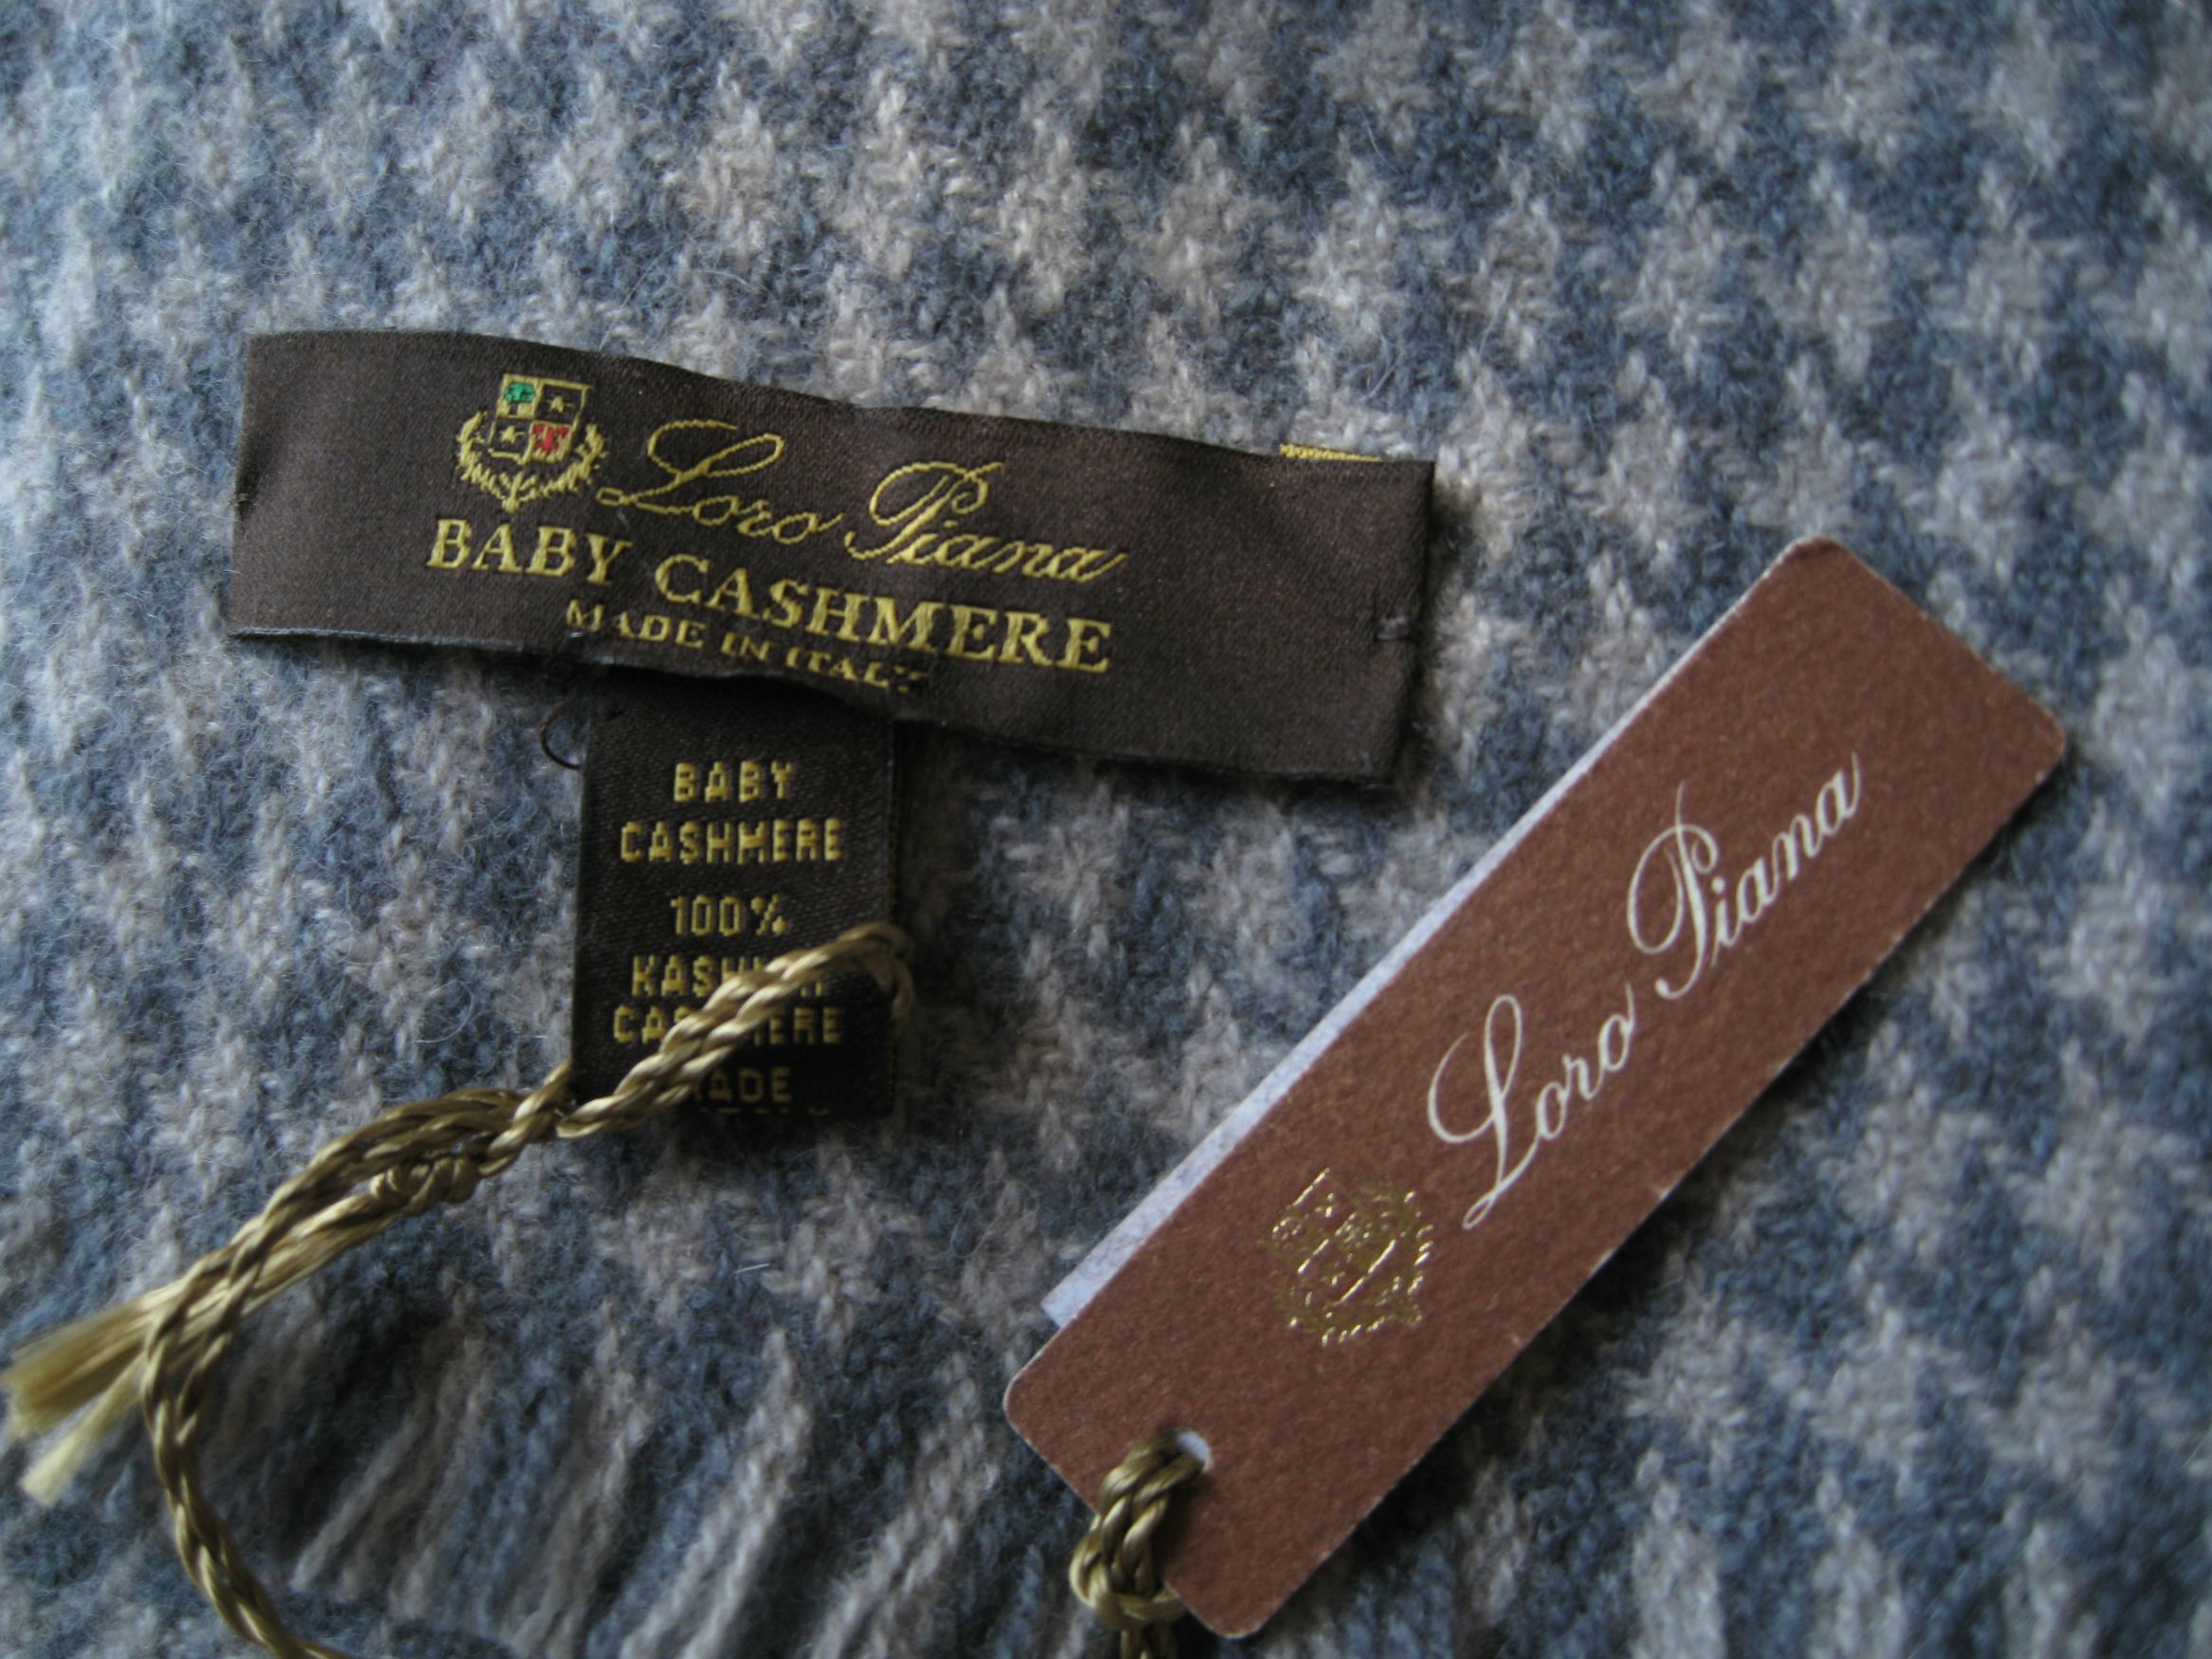 Cashmere Scarf at TAGS